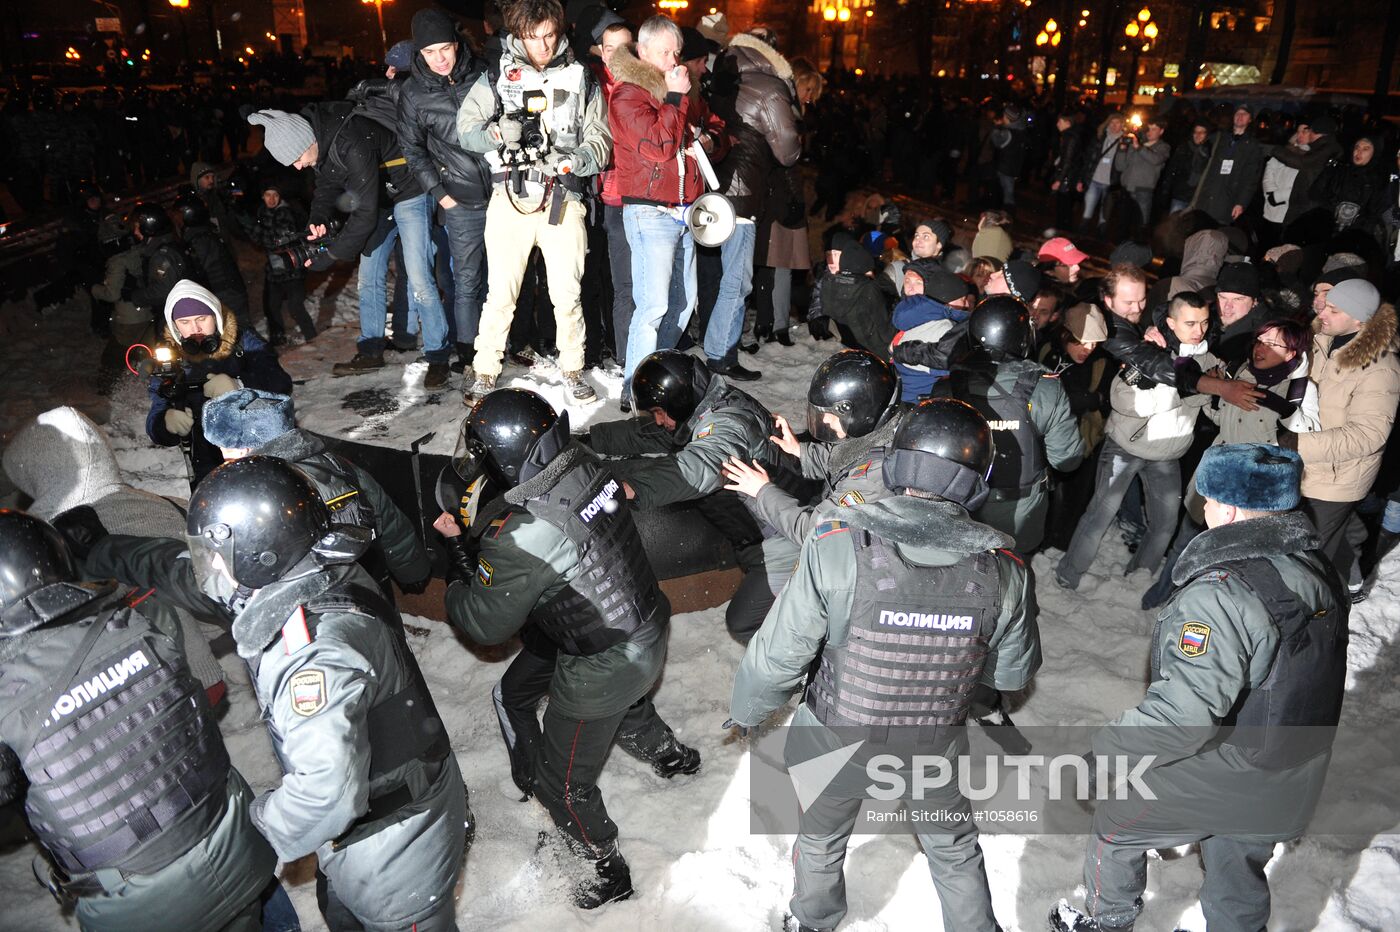 Police arrest protesters in Moscow